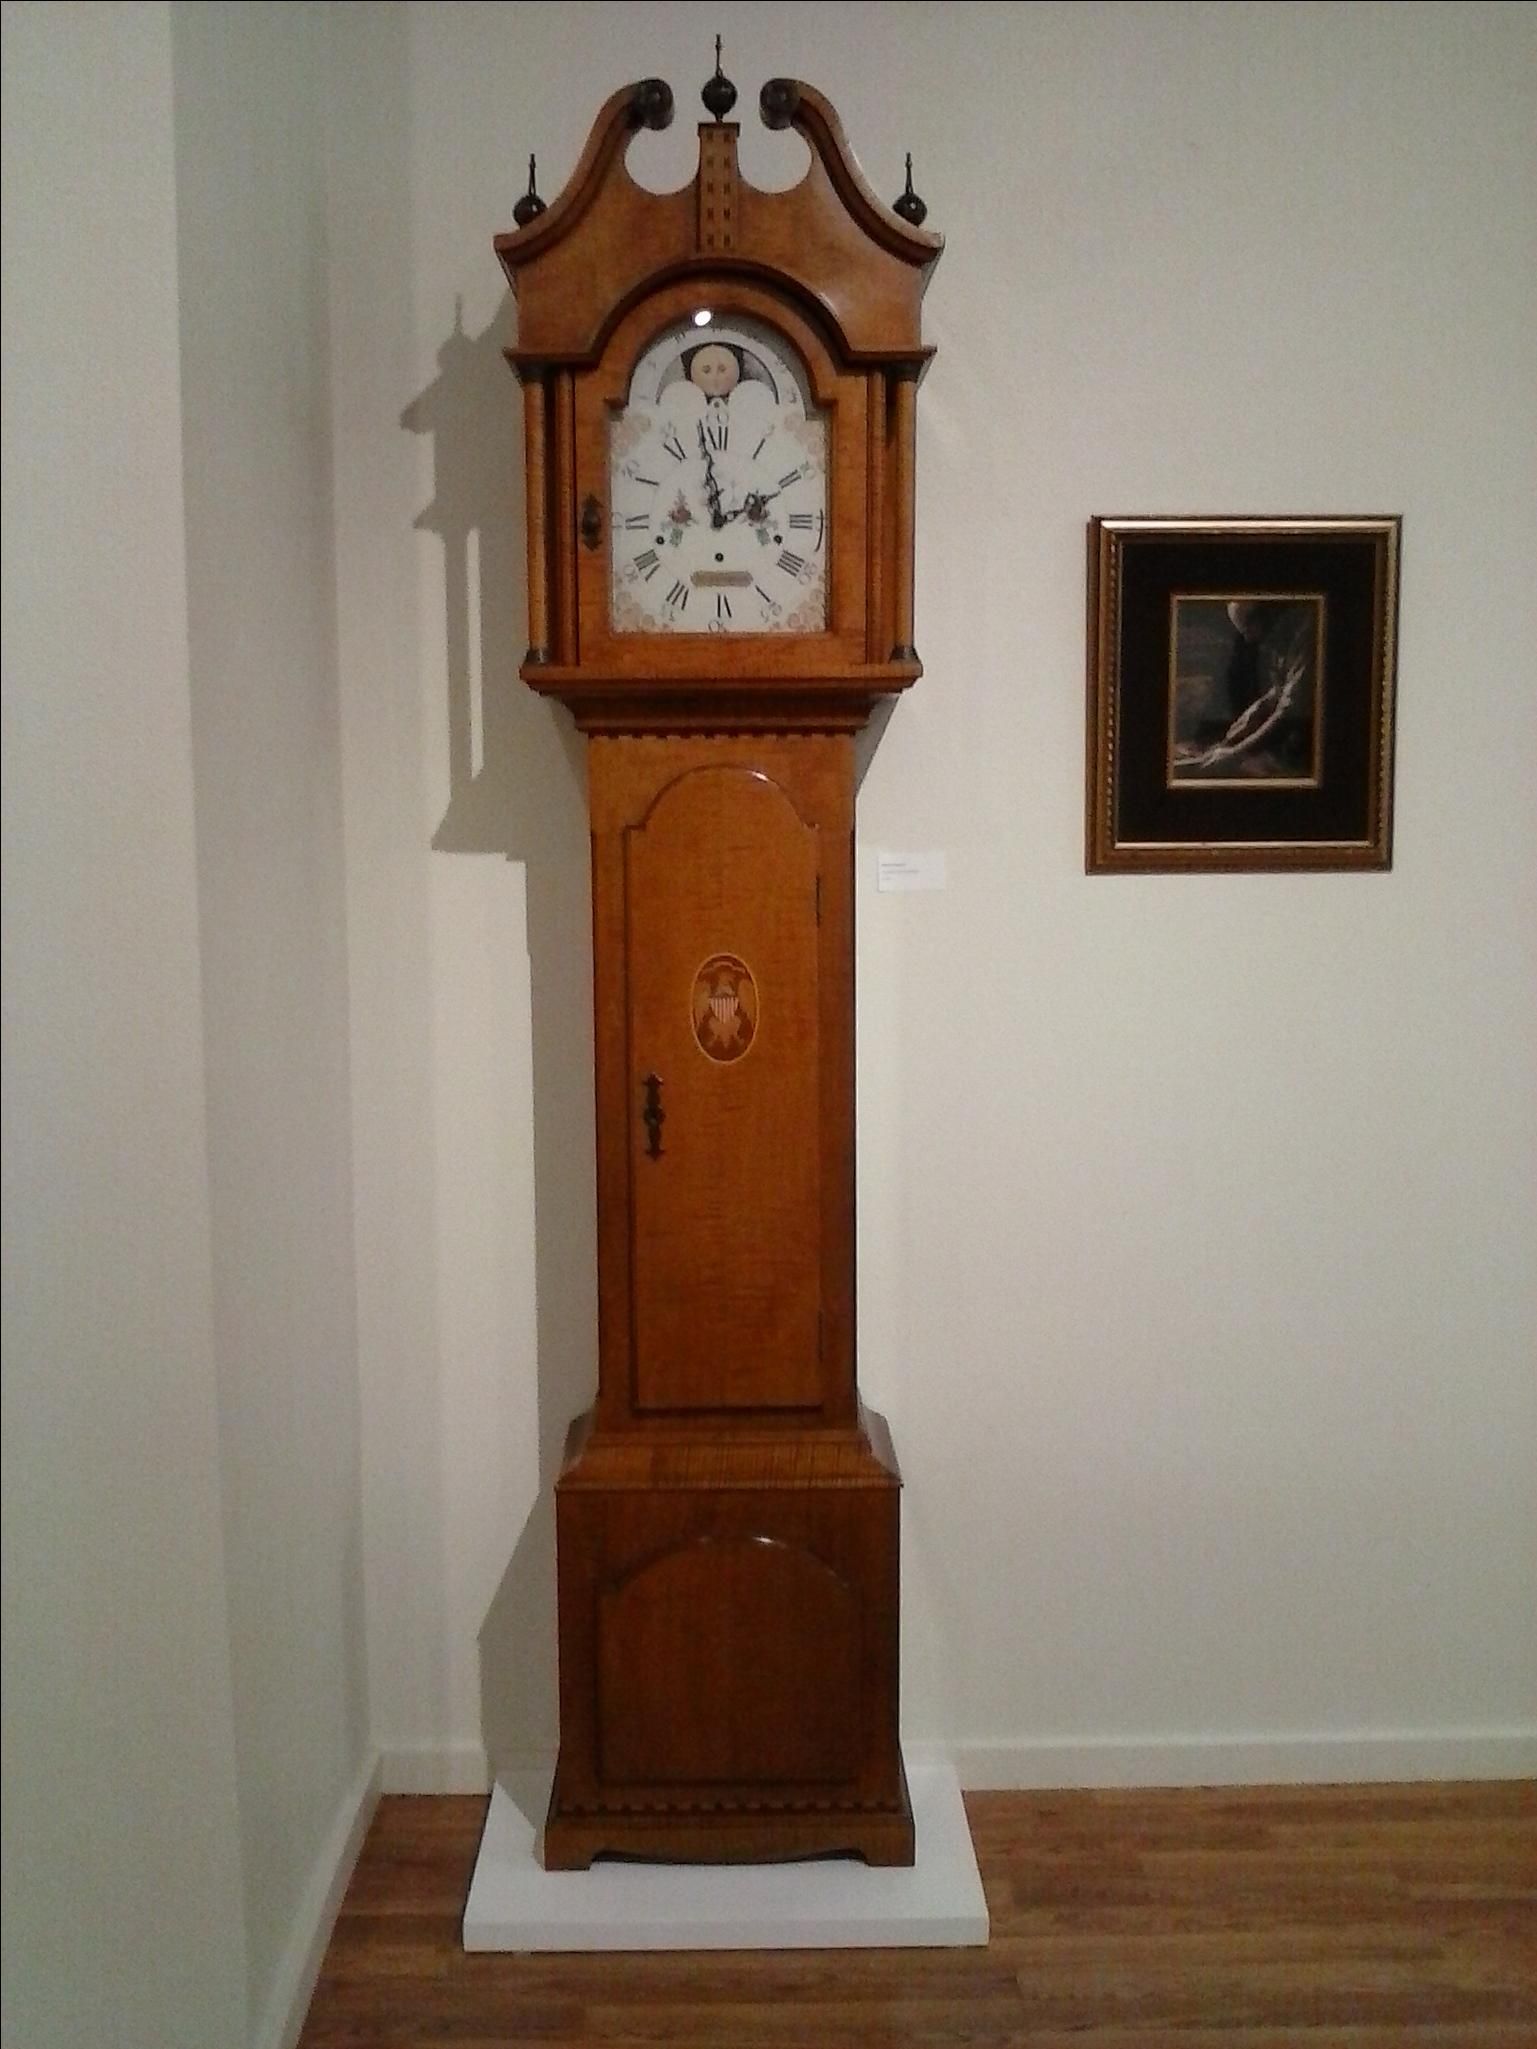 Handmade Federal Style Grandfather Clock Reproduction By Ed